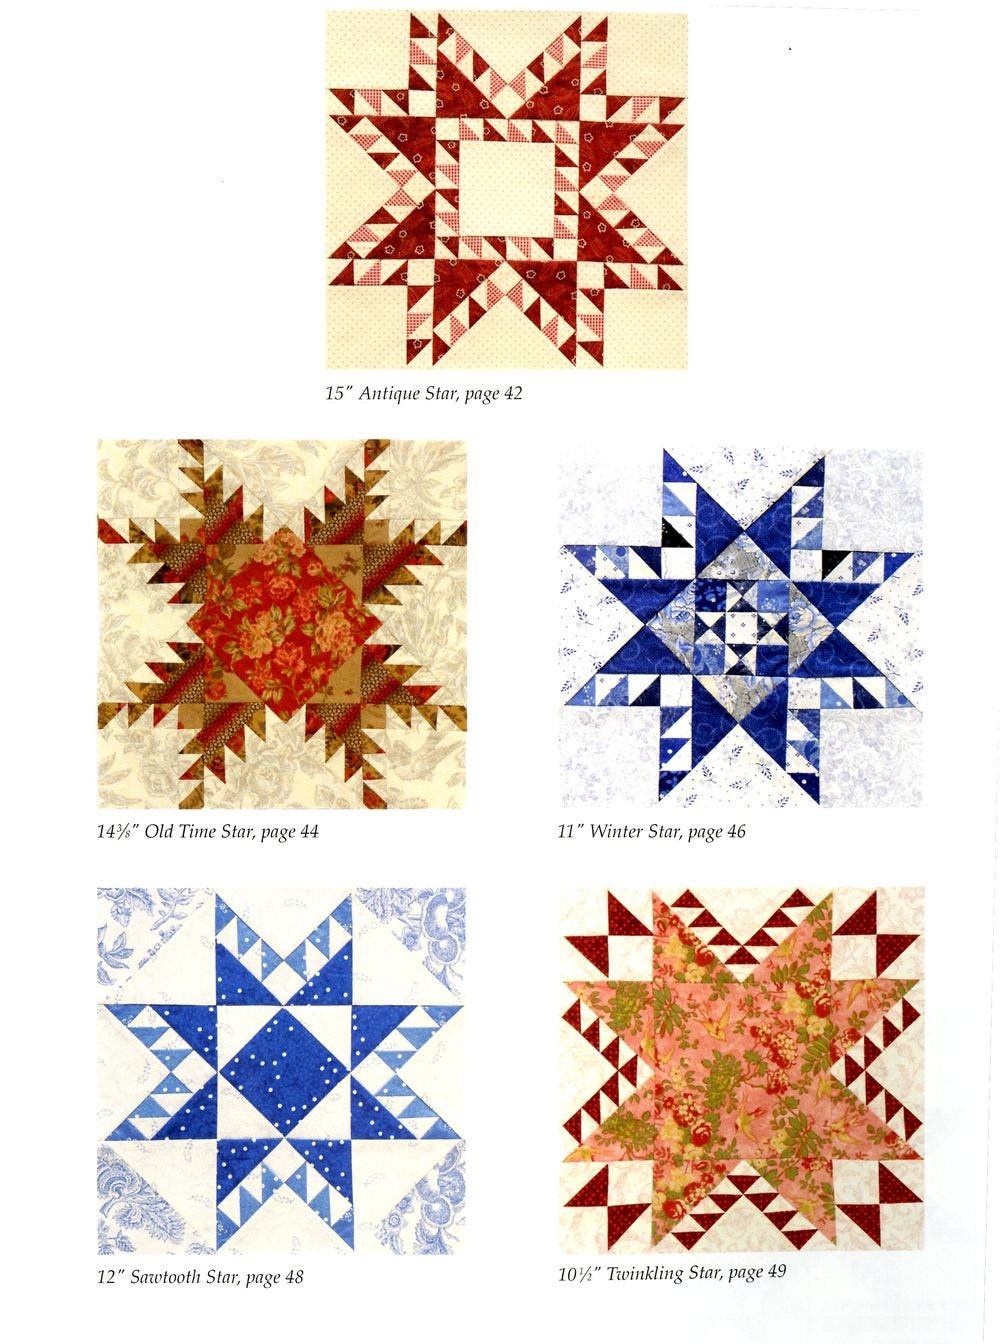 Feathered Star Quilt Blocks 2 by Marsha McCloskey for Feathered Star Productions